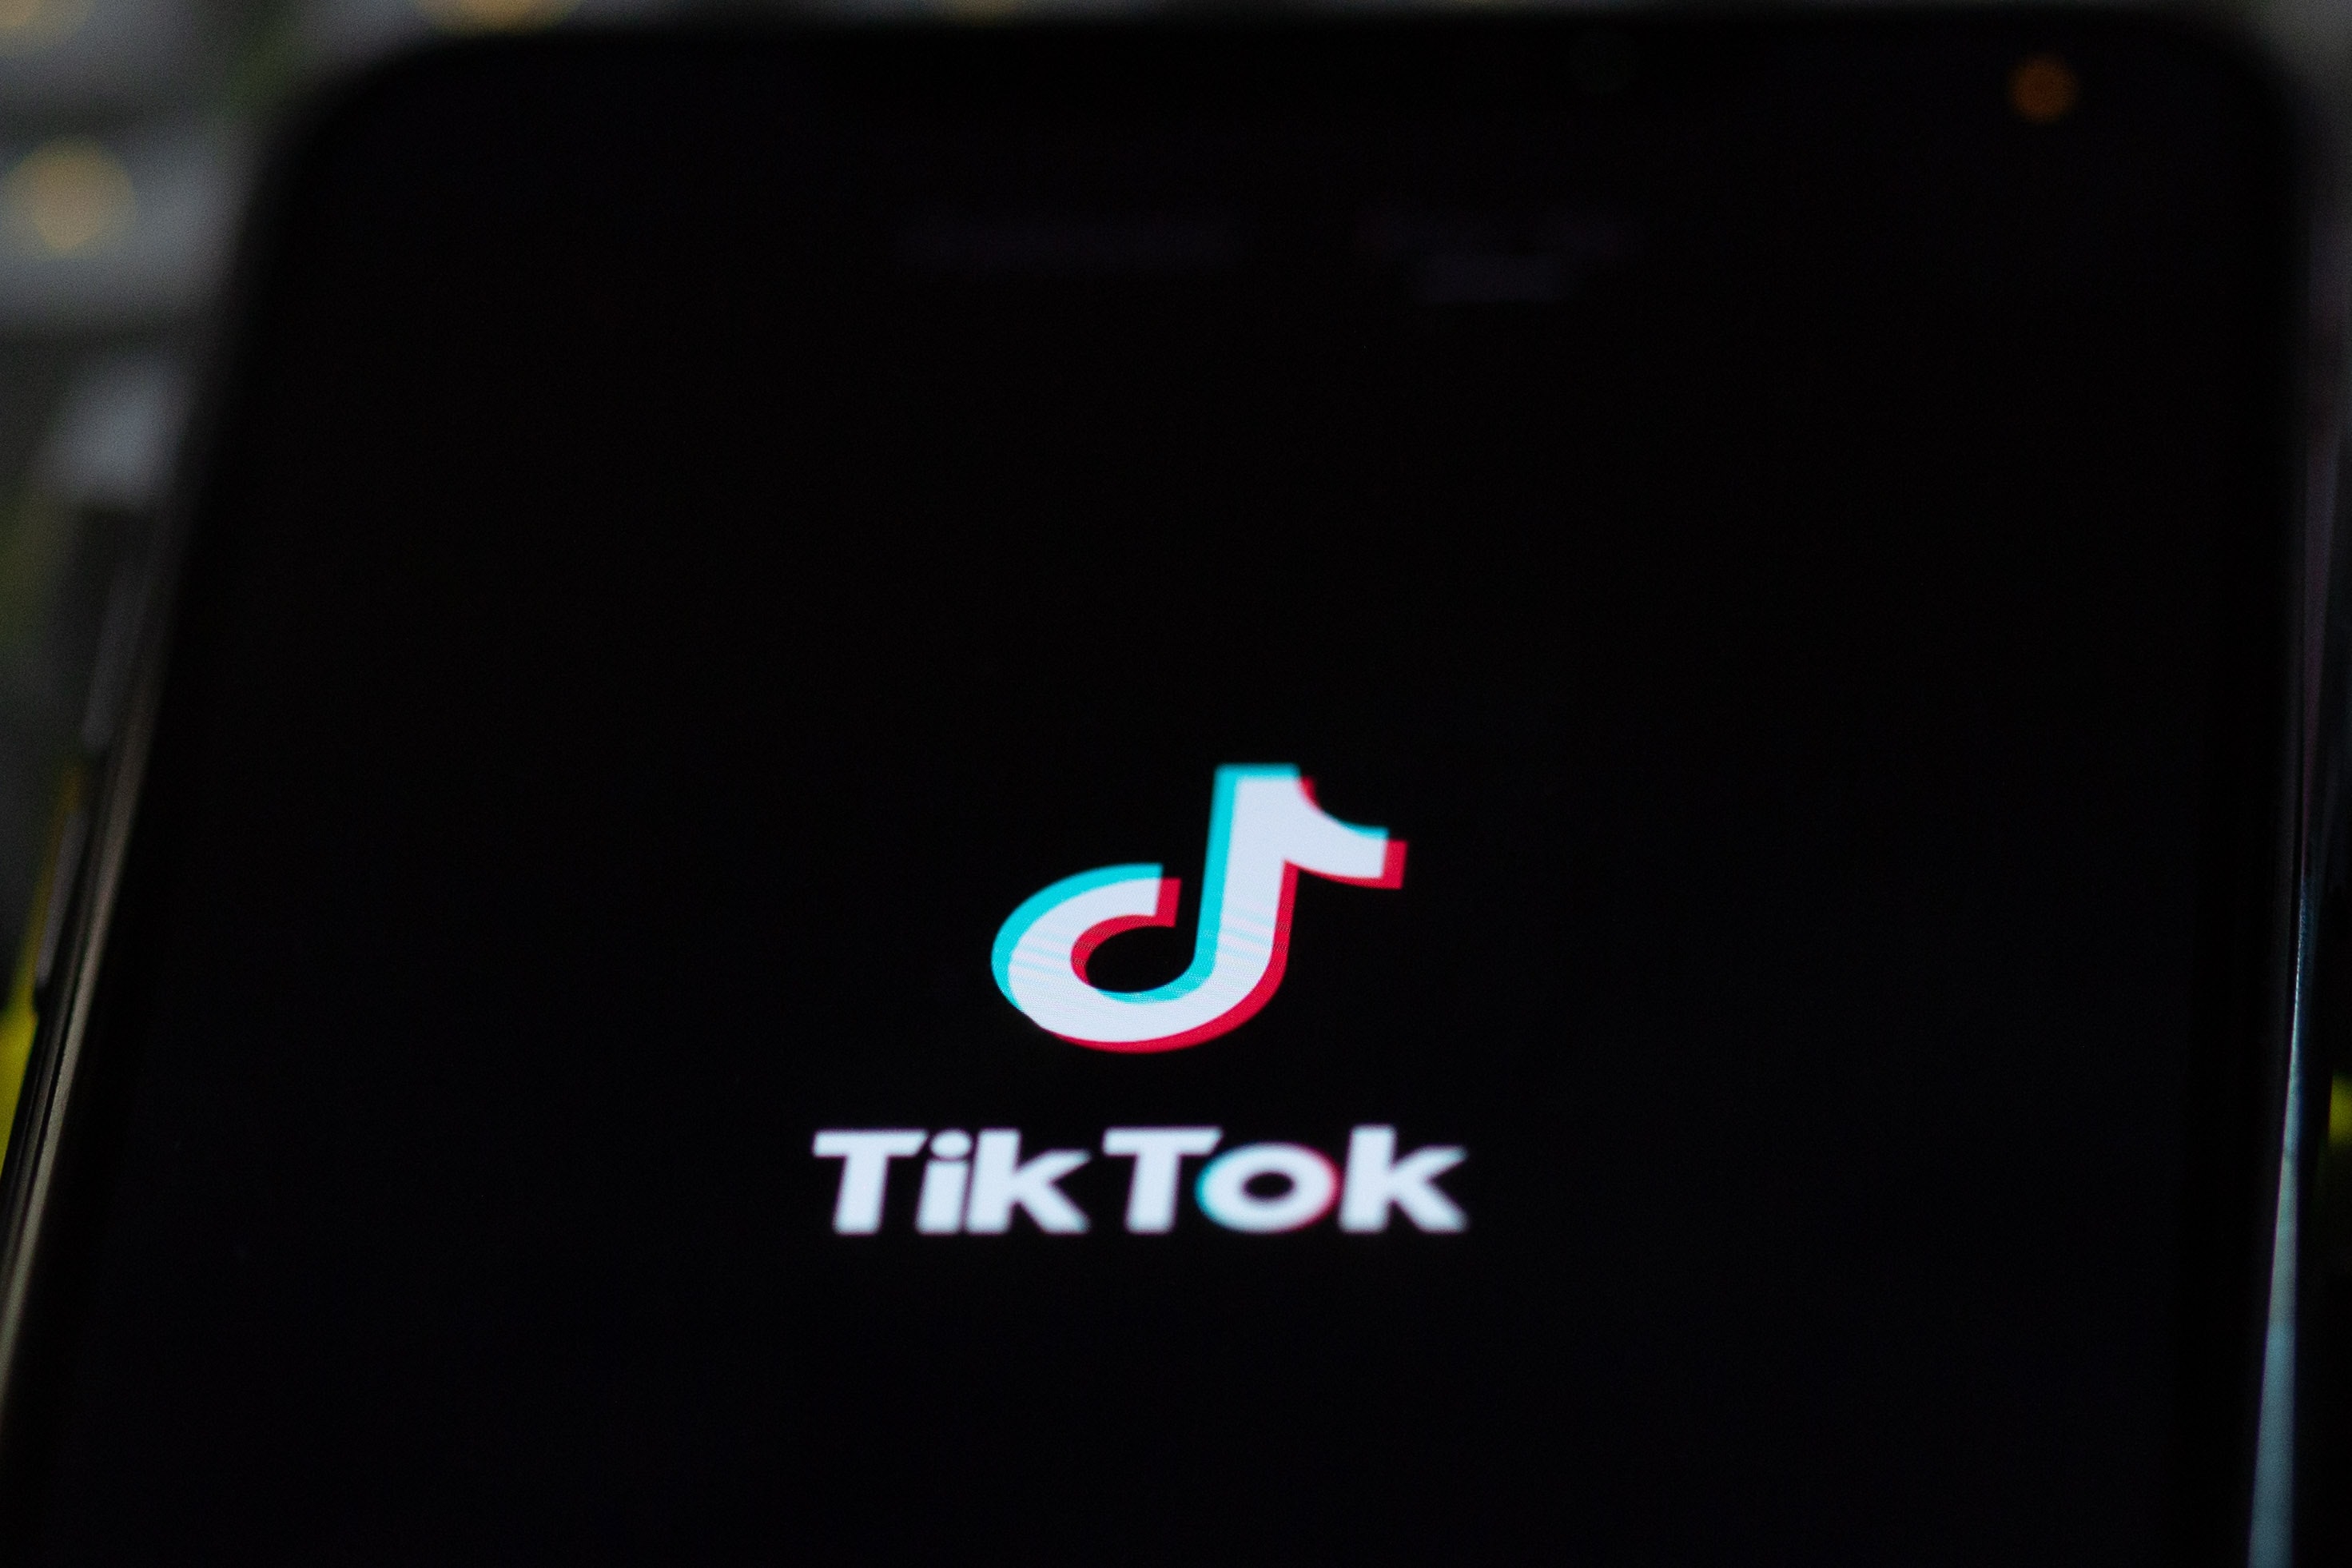 Now It's Easy, Simple, and Fast to Download Videos on TikTok for Free and Online: Learn How